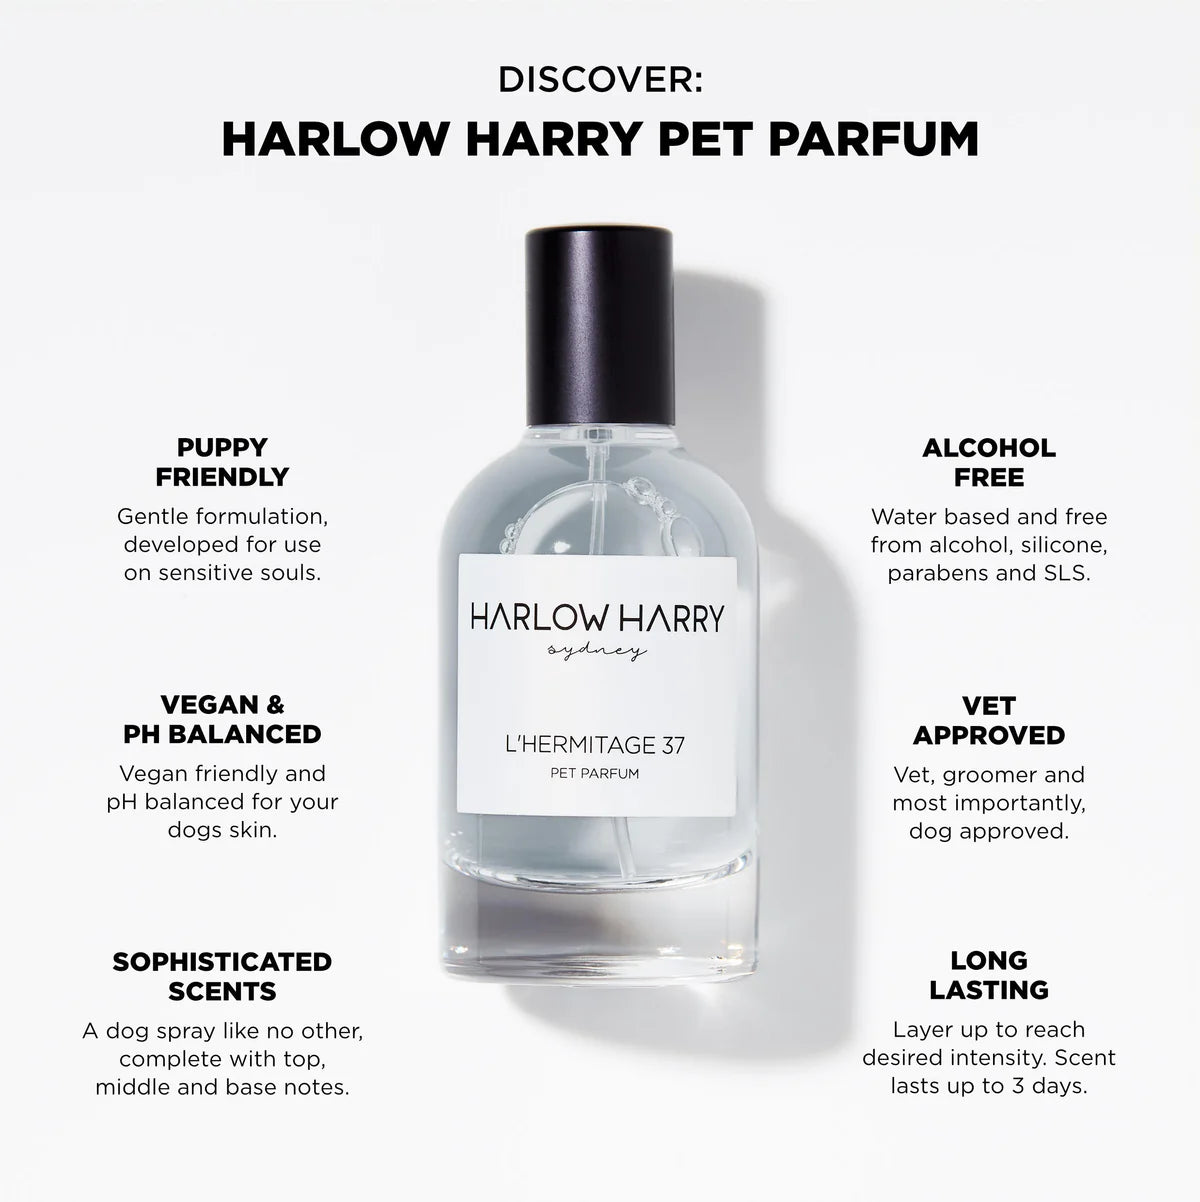 A sleek bottle of L'hermitage 37 Dog Perfume by Harlow Harry is displayed, marketed as a luxury unisex scent for dogs with features like being friendly pH balanced, vegan, alcohol-free, and vet approved.